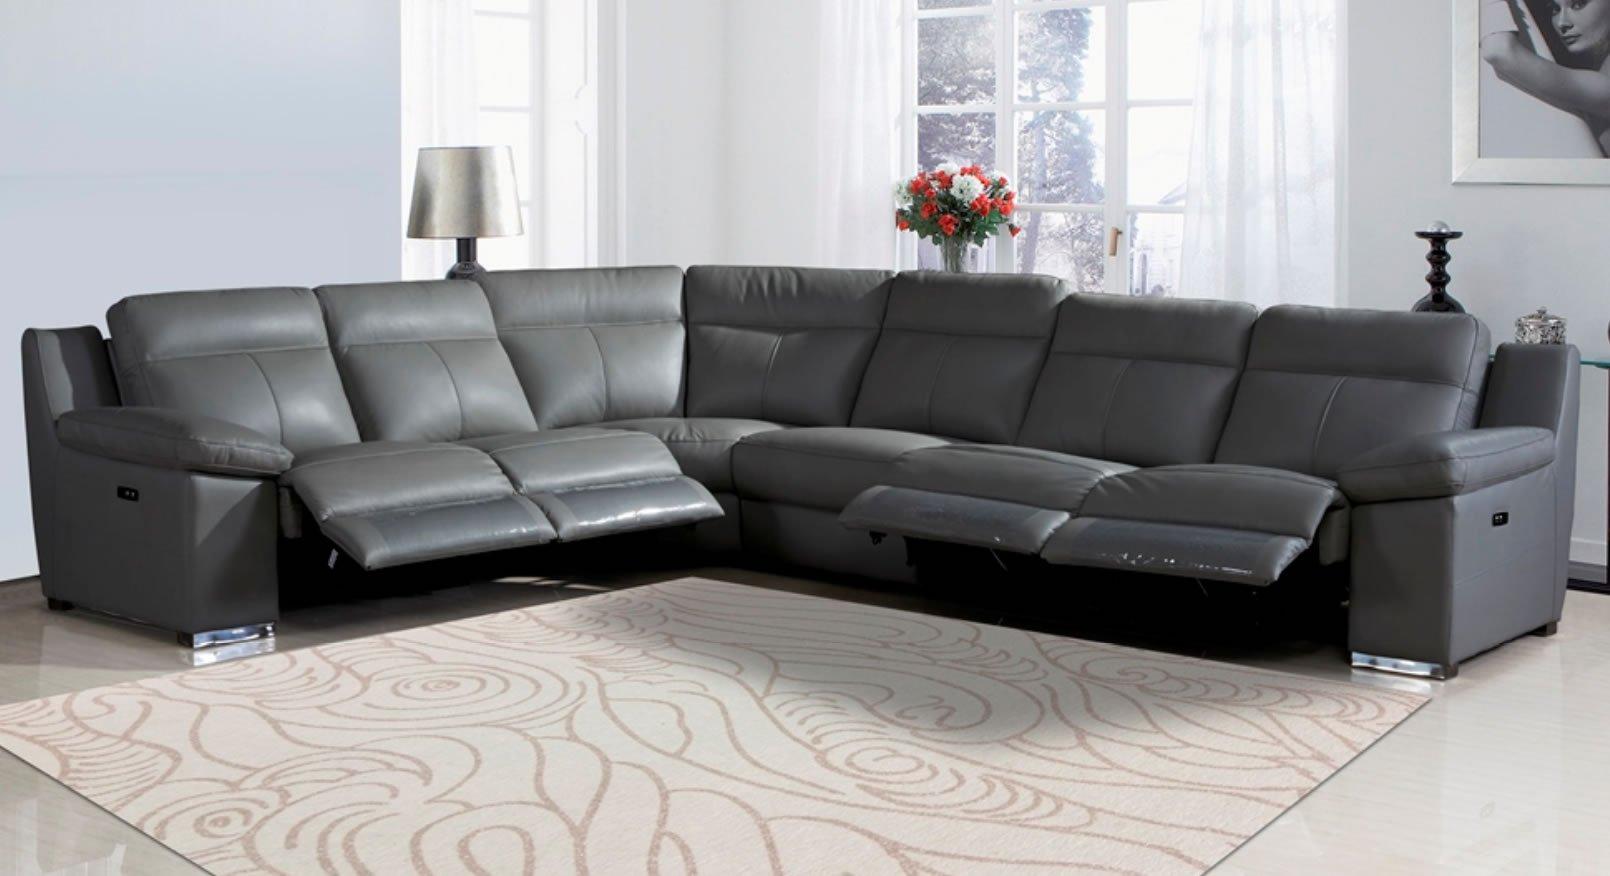 Contemporary Reclining Sectional UR9583 GREY UR9583 GREY in Dark Gray Top grain leather